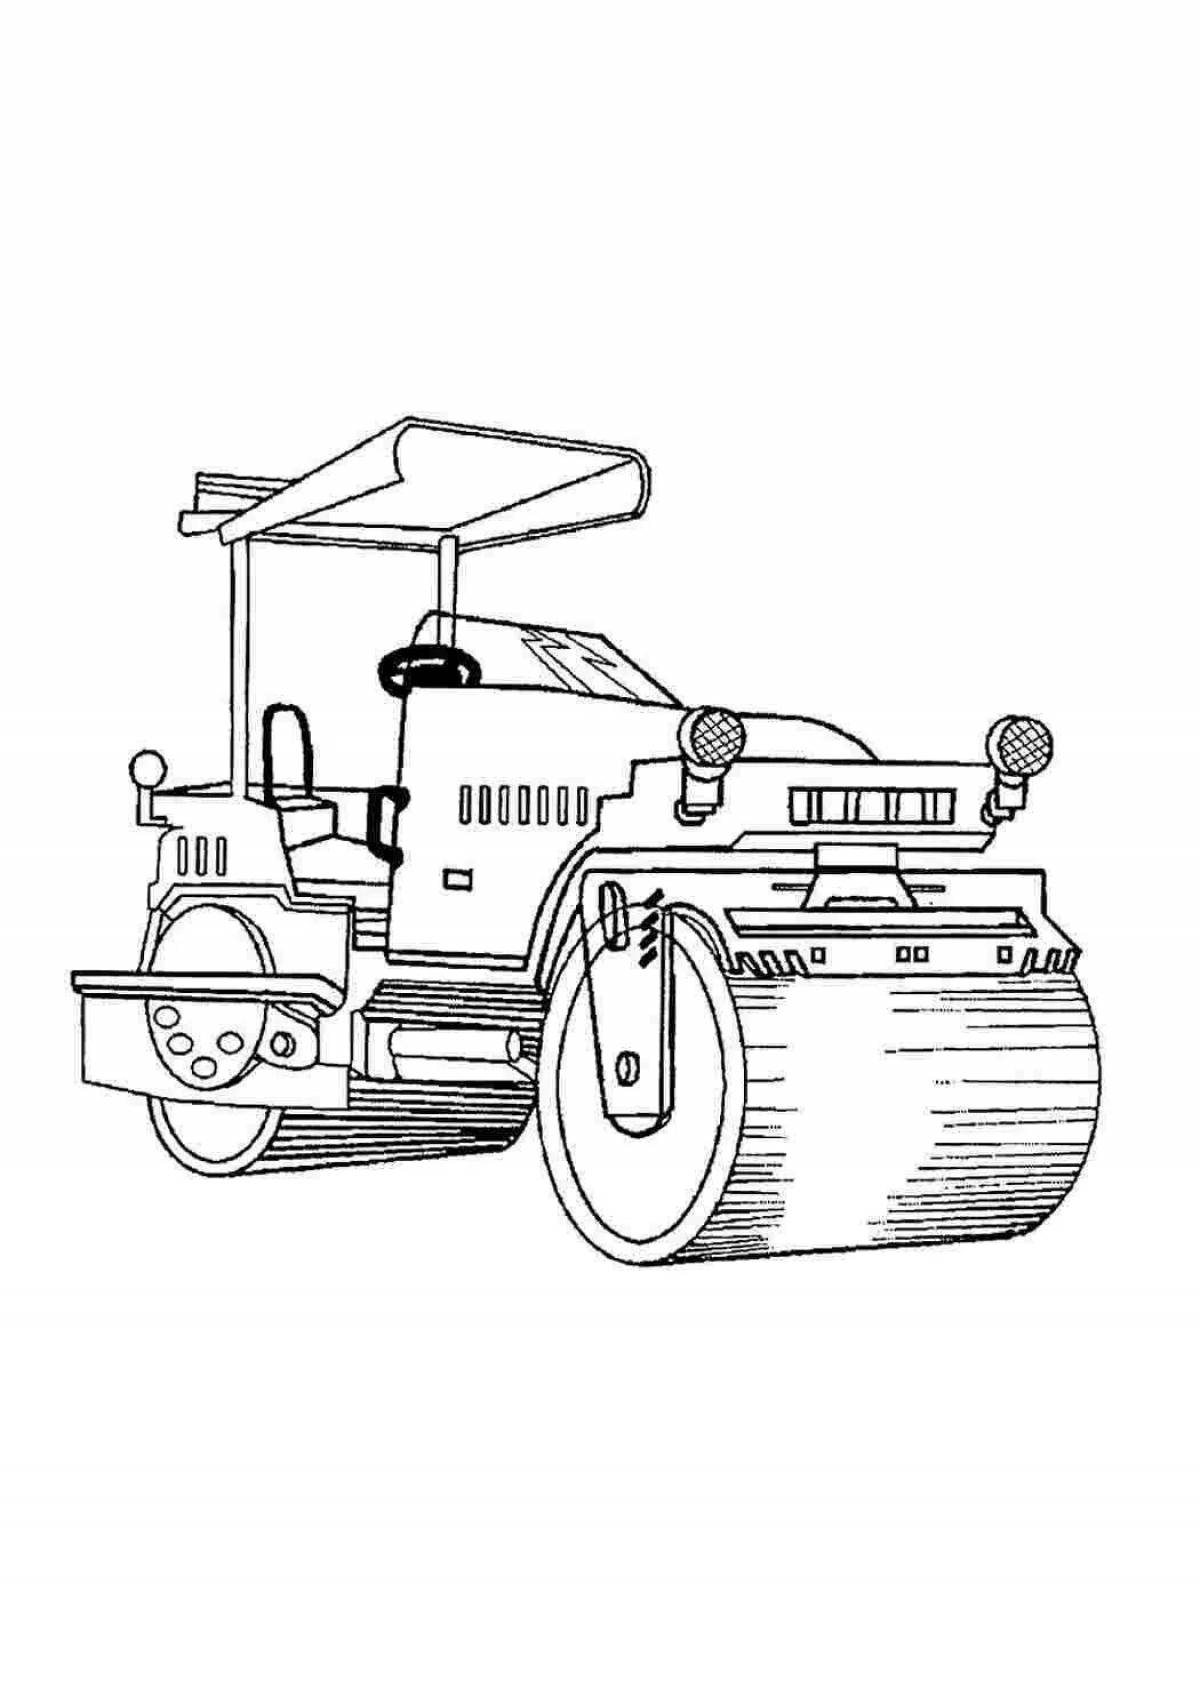 Playful construction machinery coloring page for boys